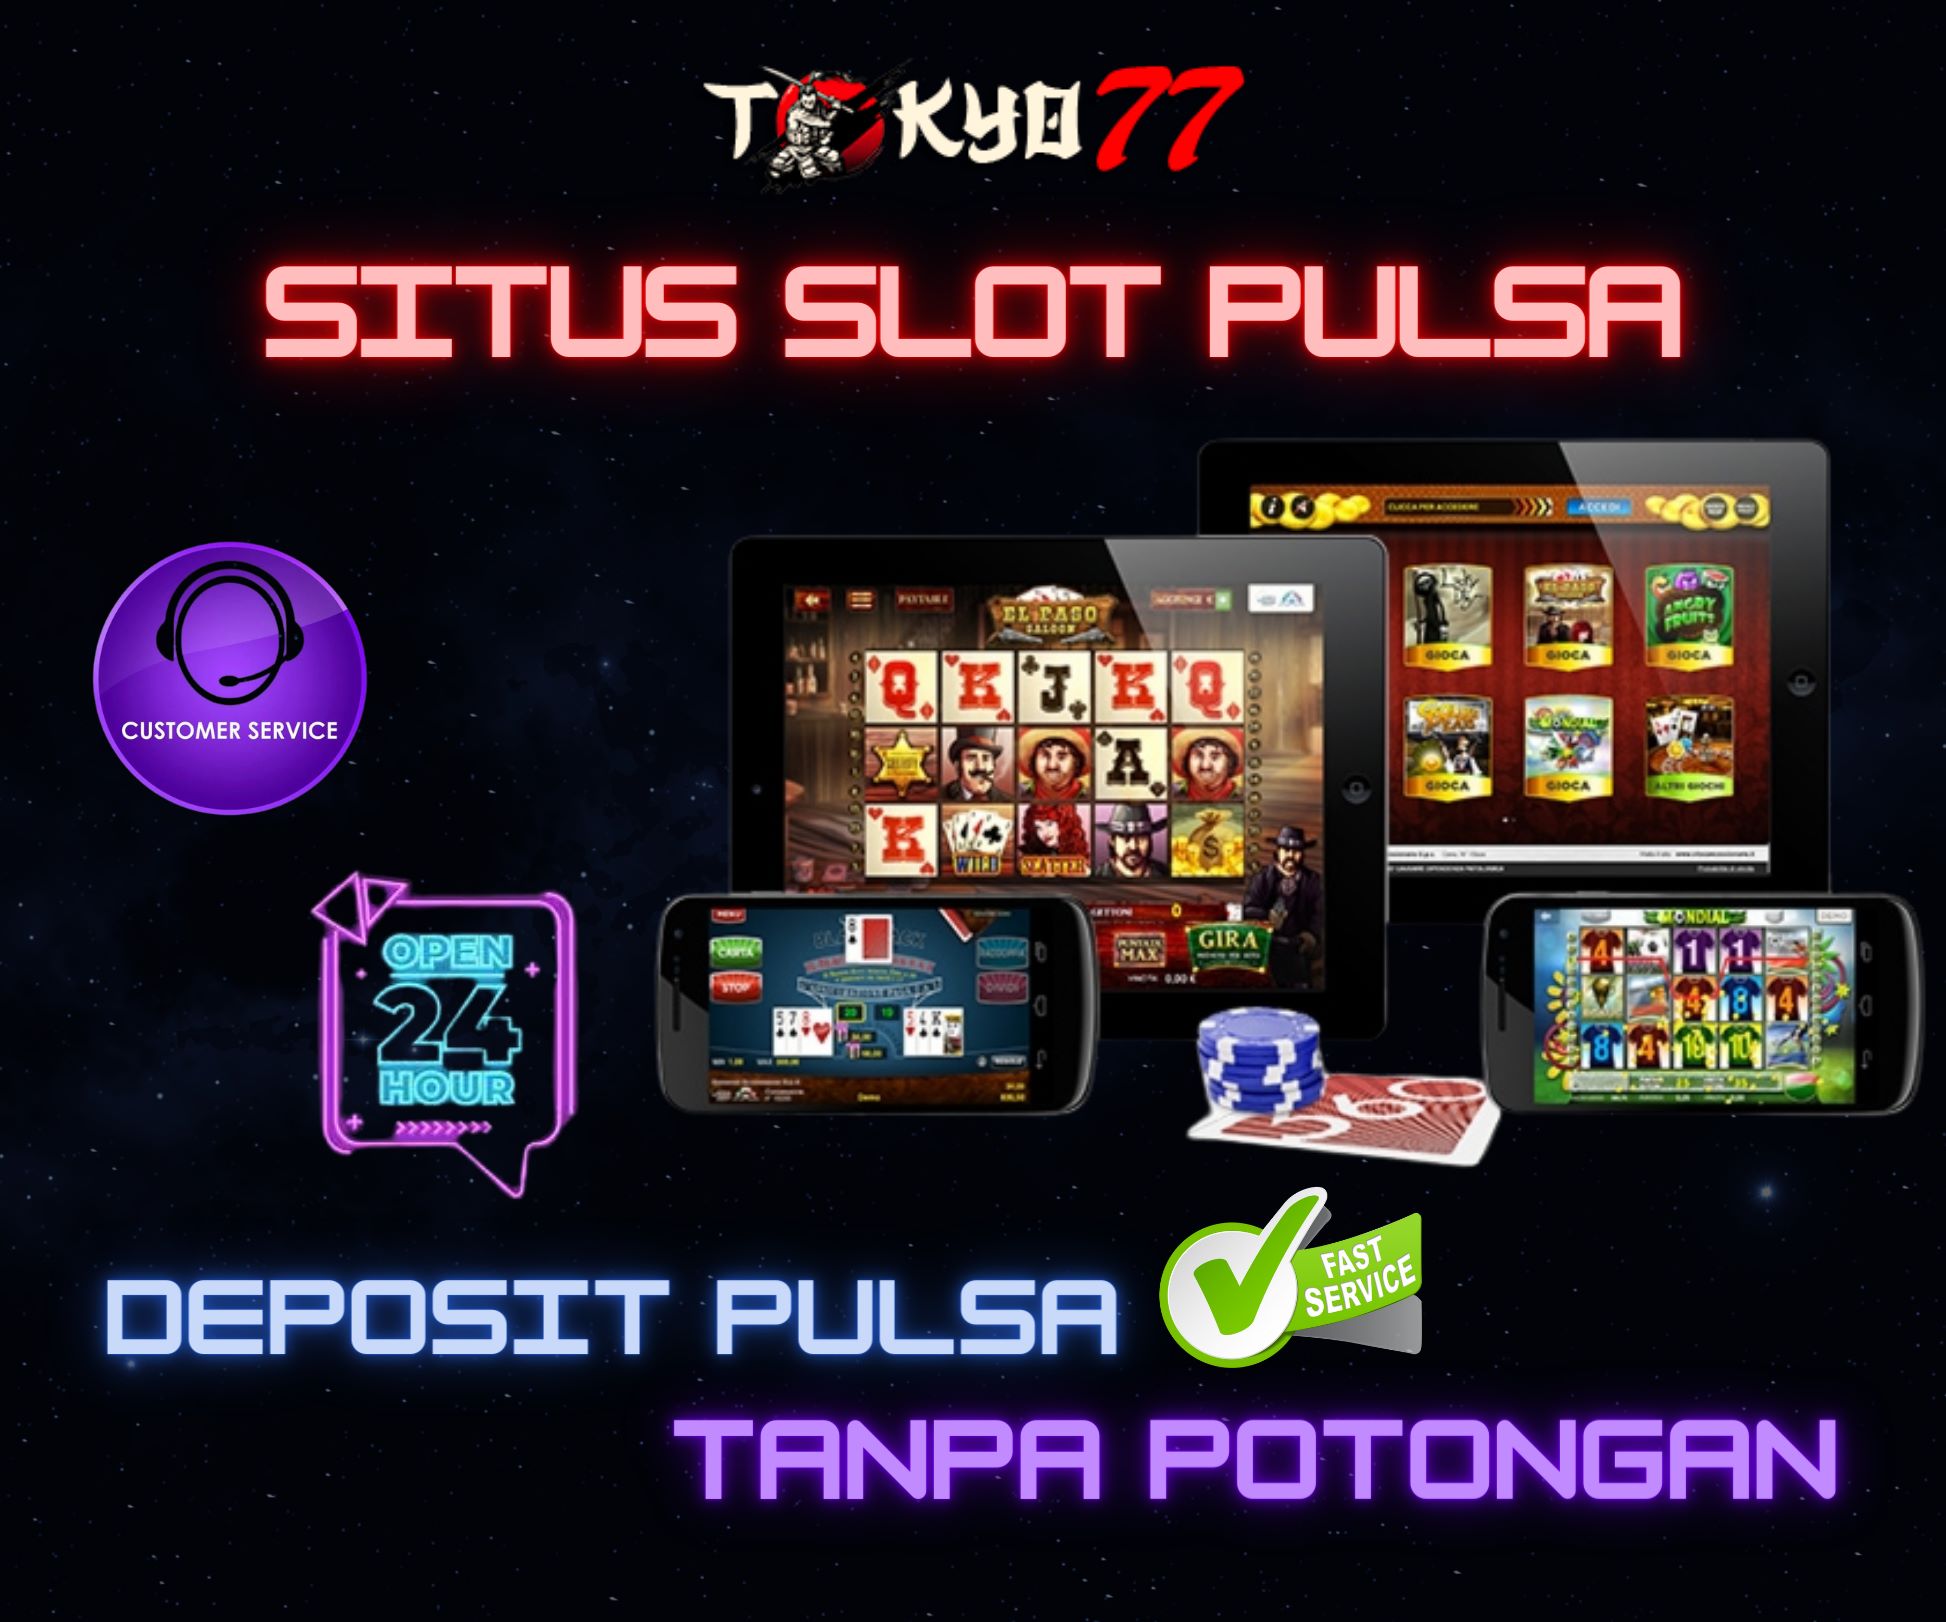 The Rise of Zeus Slot, Qris Slot, and Slot Deposit Pulsa: A Trifecta in Online Gaming